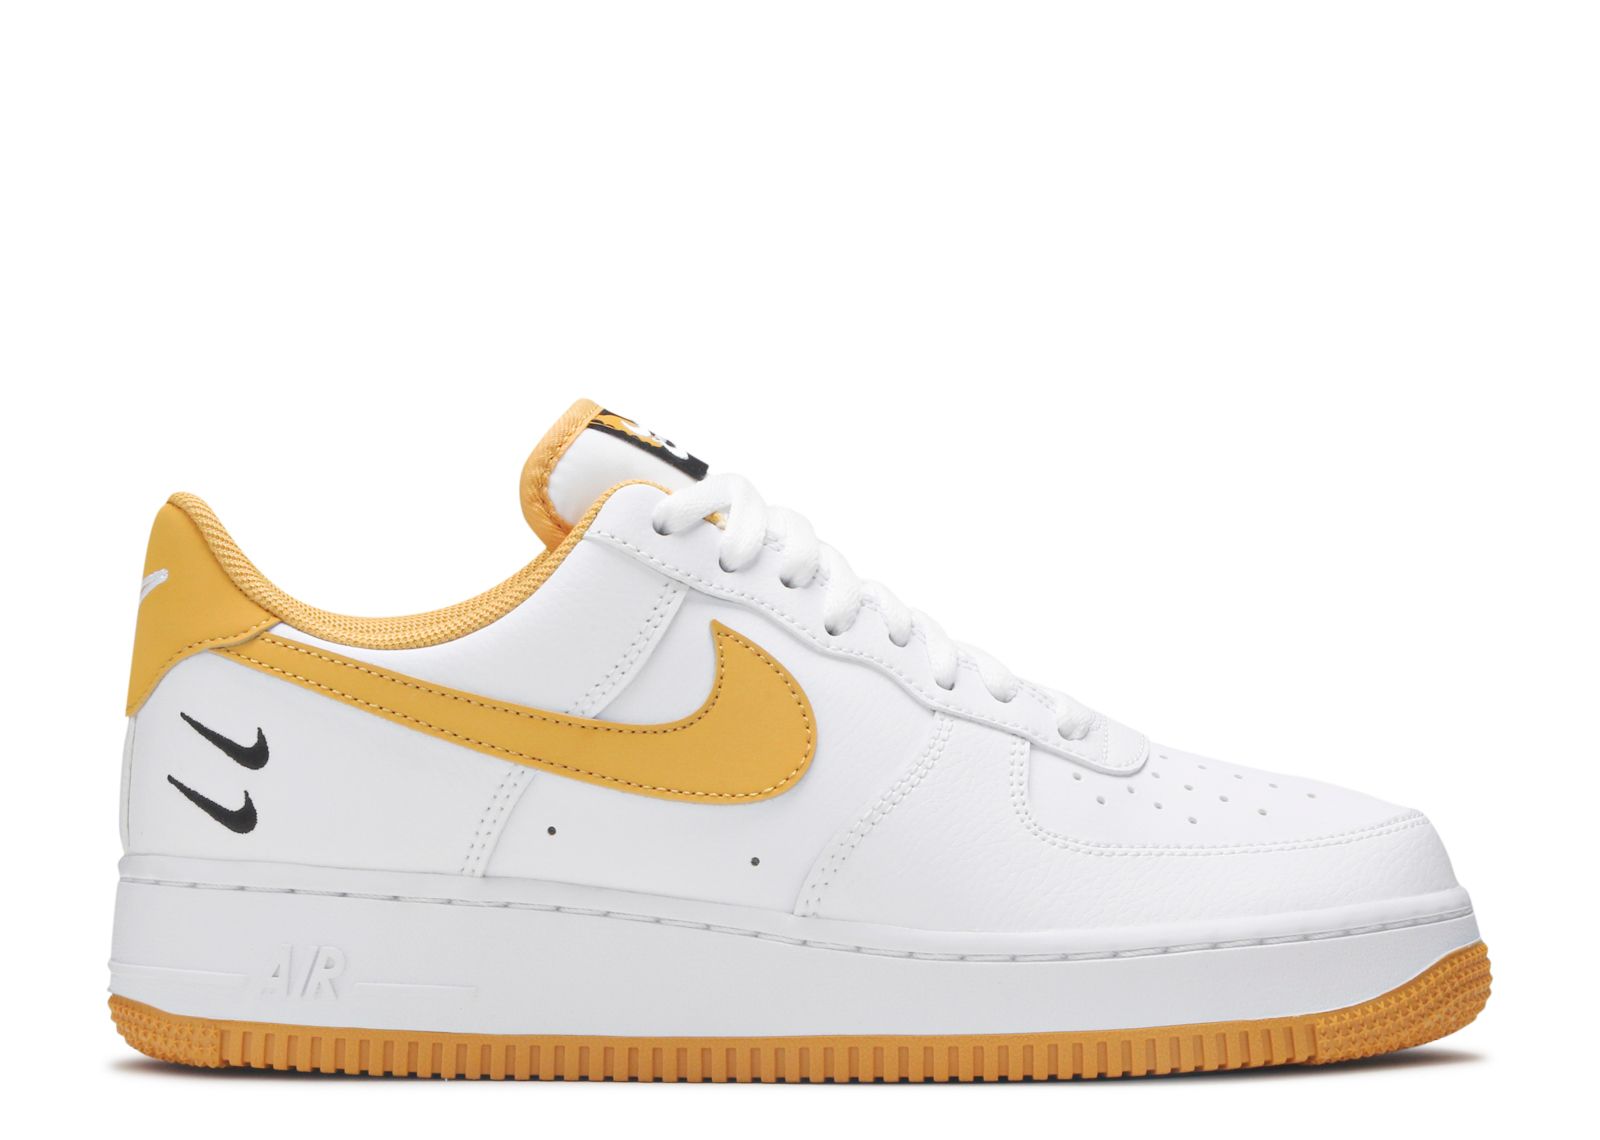 Nike Air Force 1 '07 double swoosh spray trainers in white and orange